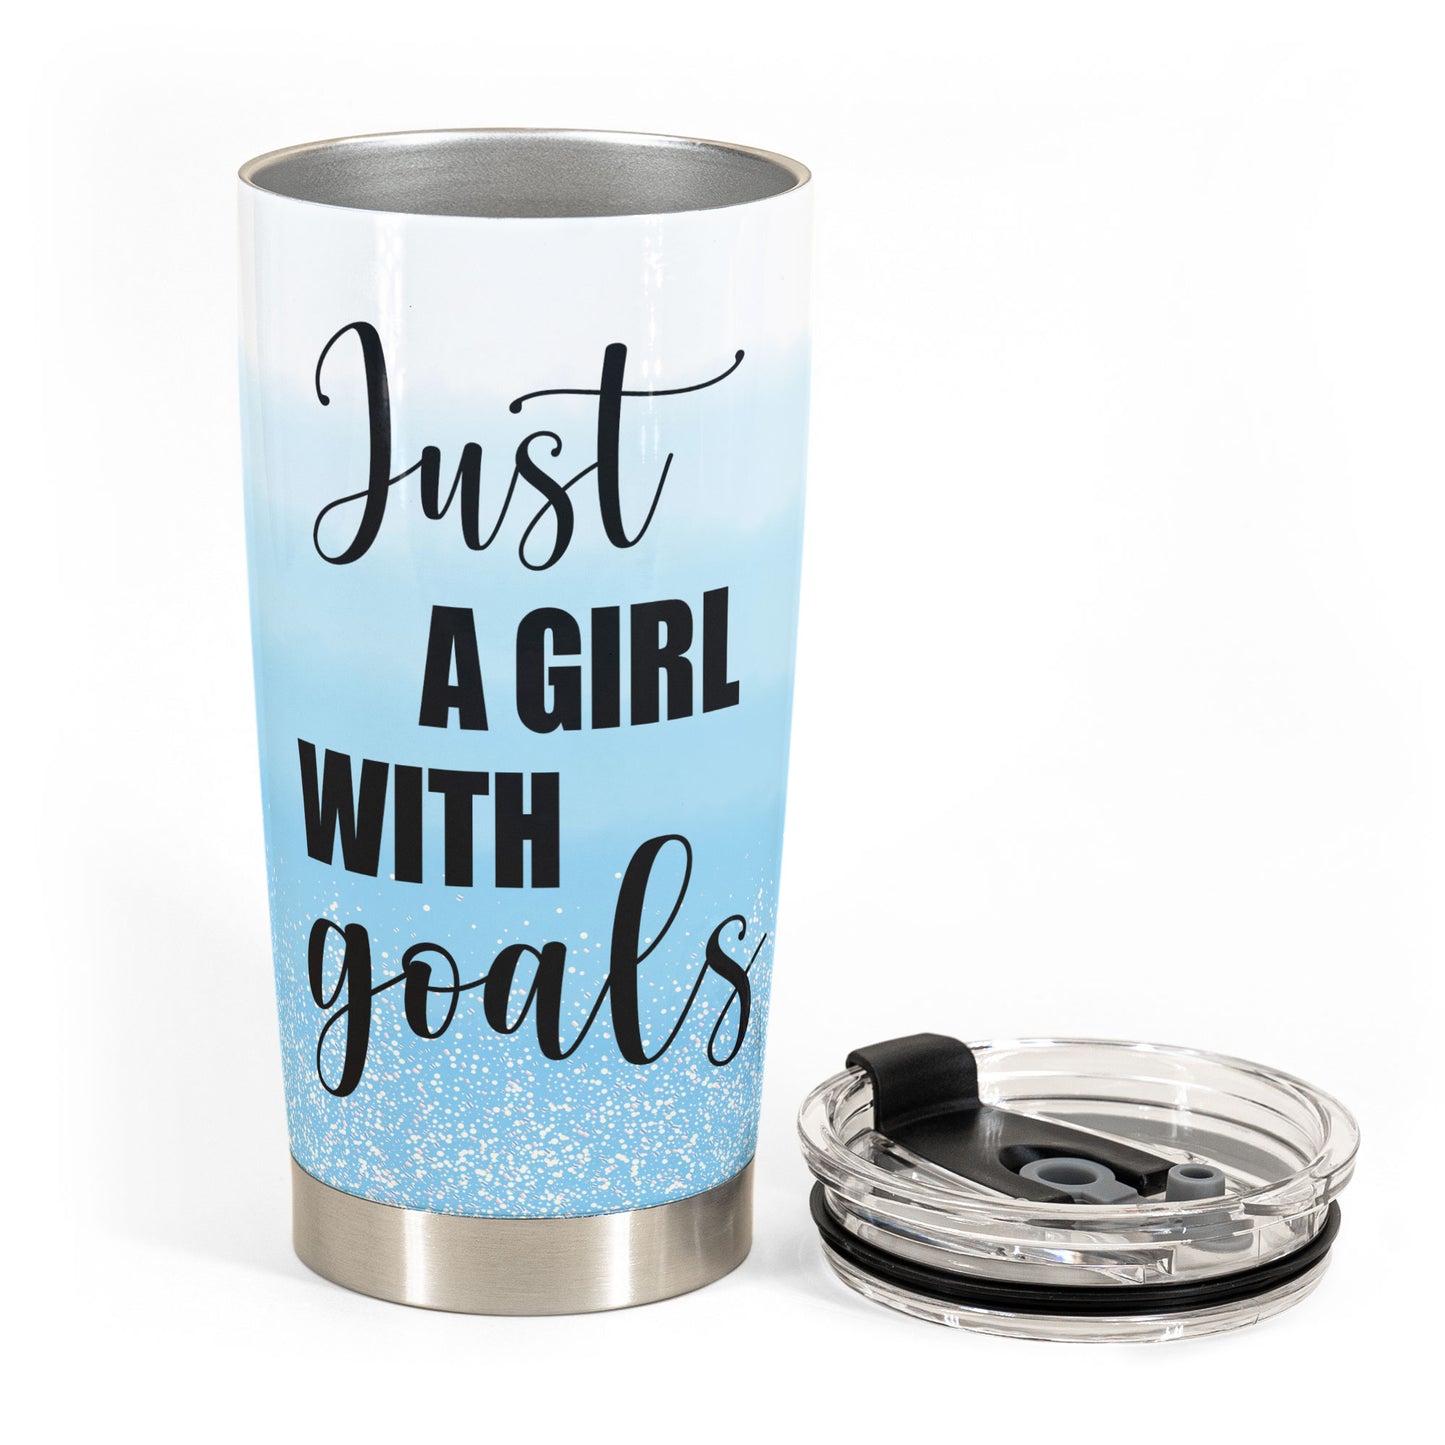 Just A Girl With Goals - Personalized Tumbler Cup - Gift For Fitness Lovers - Curvy Girl